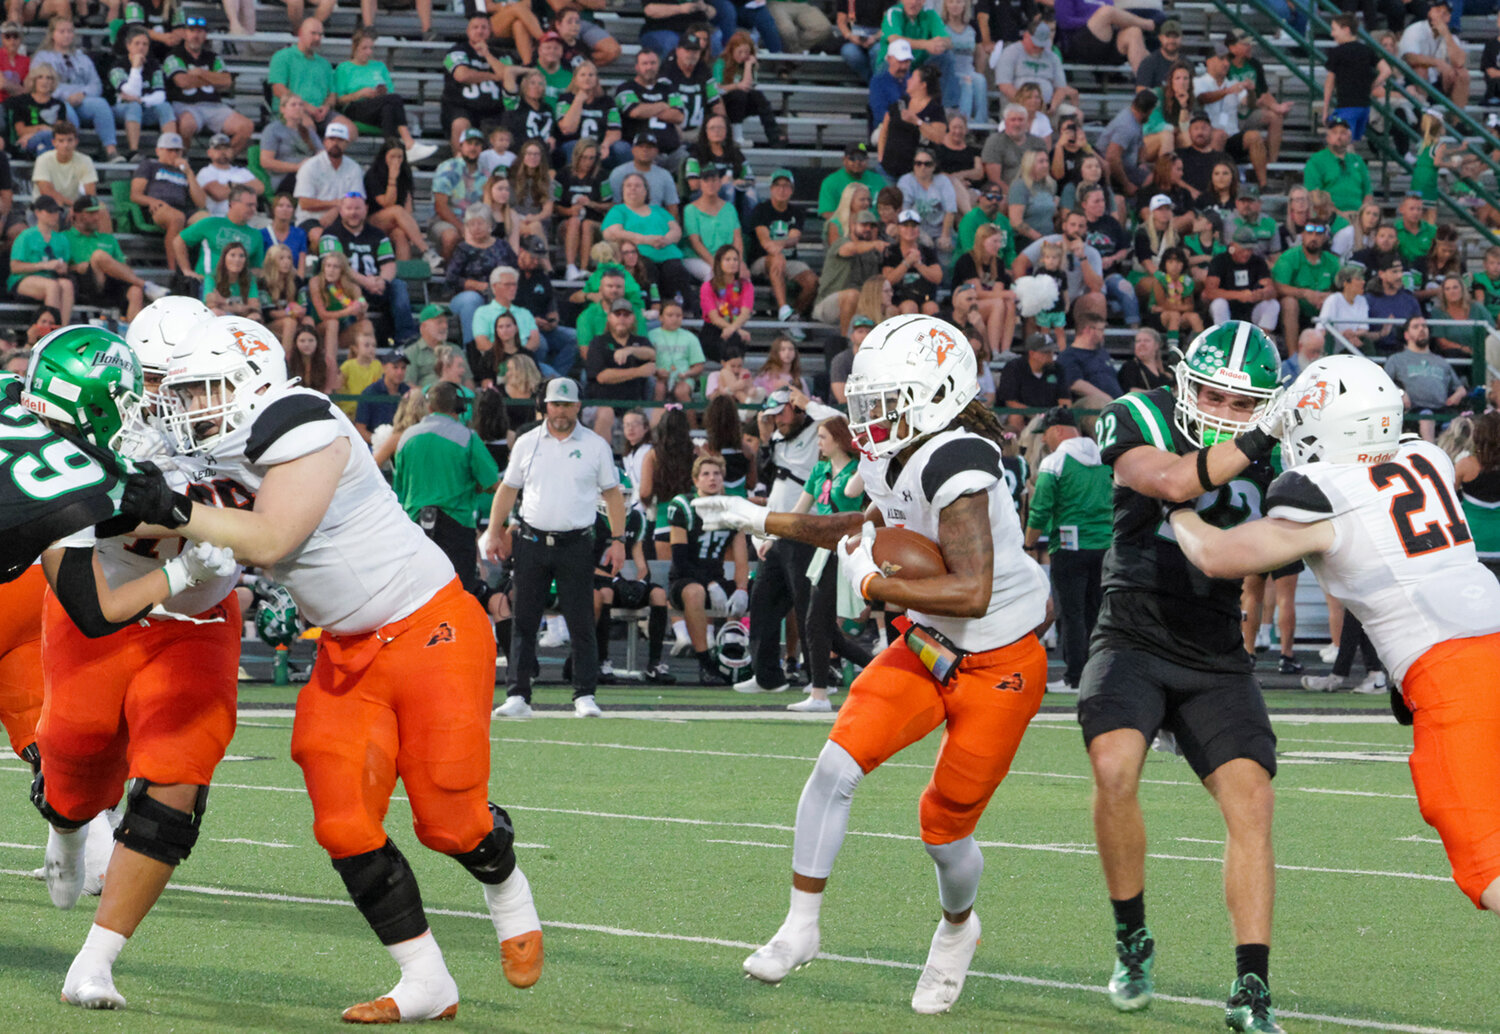 Hawk Patrick-Daniels carried 14 times for 64 yards and two touchdowns against Azle.